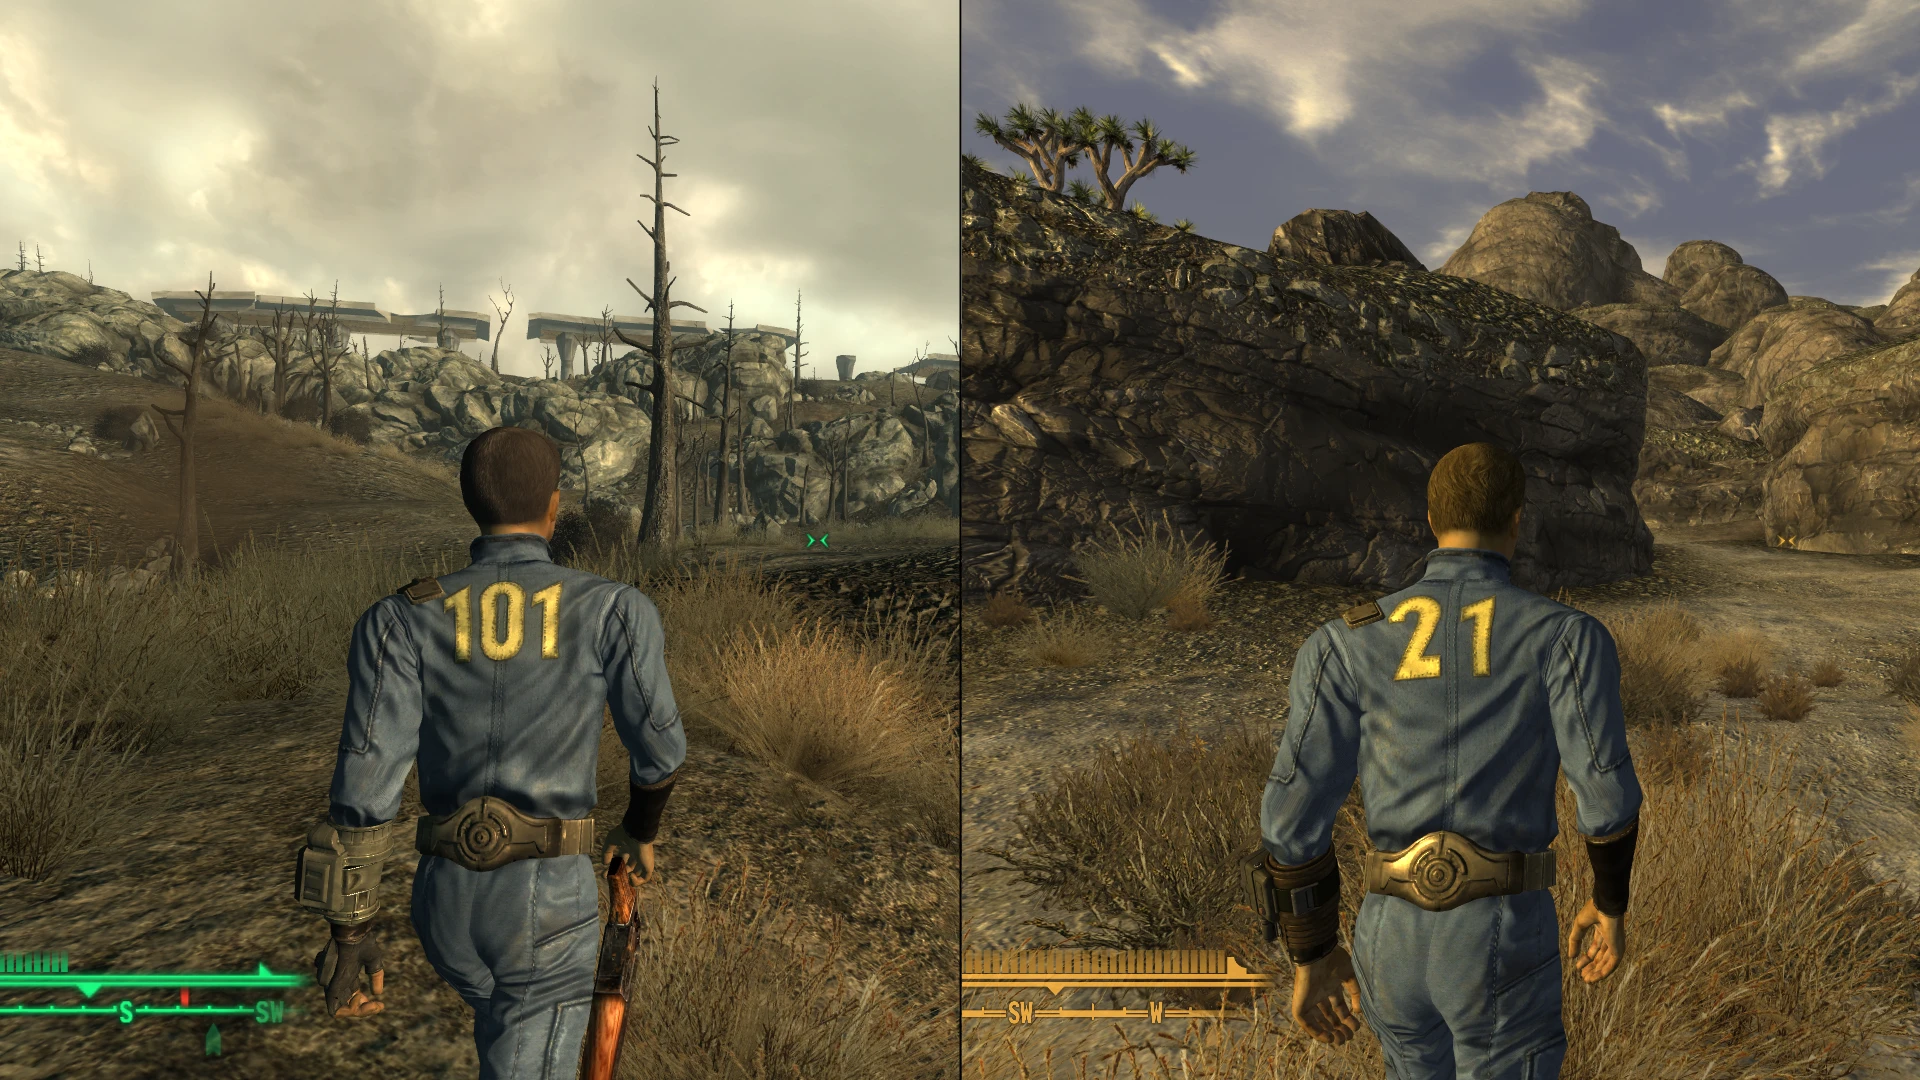 How do 'Fallout: New Vegas' and 'Fallout 4' compare to one another